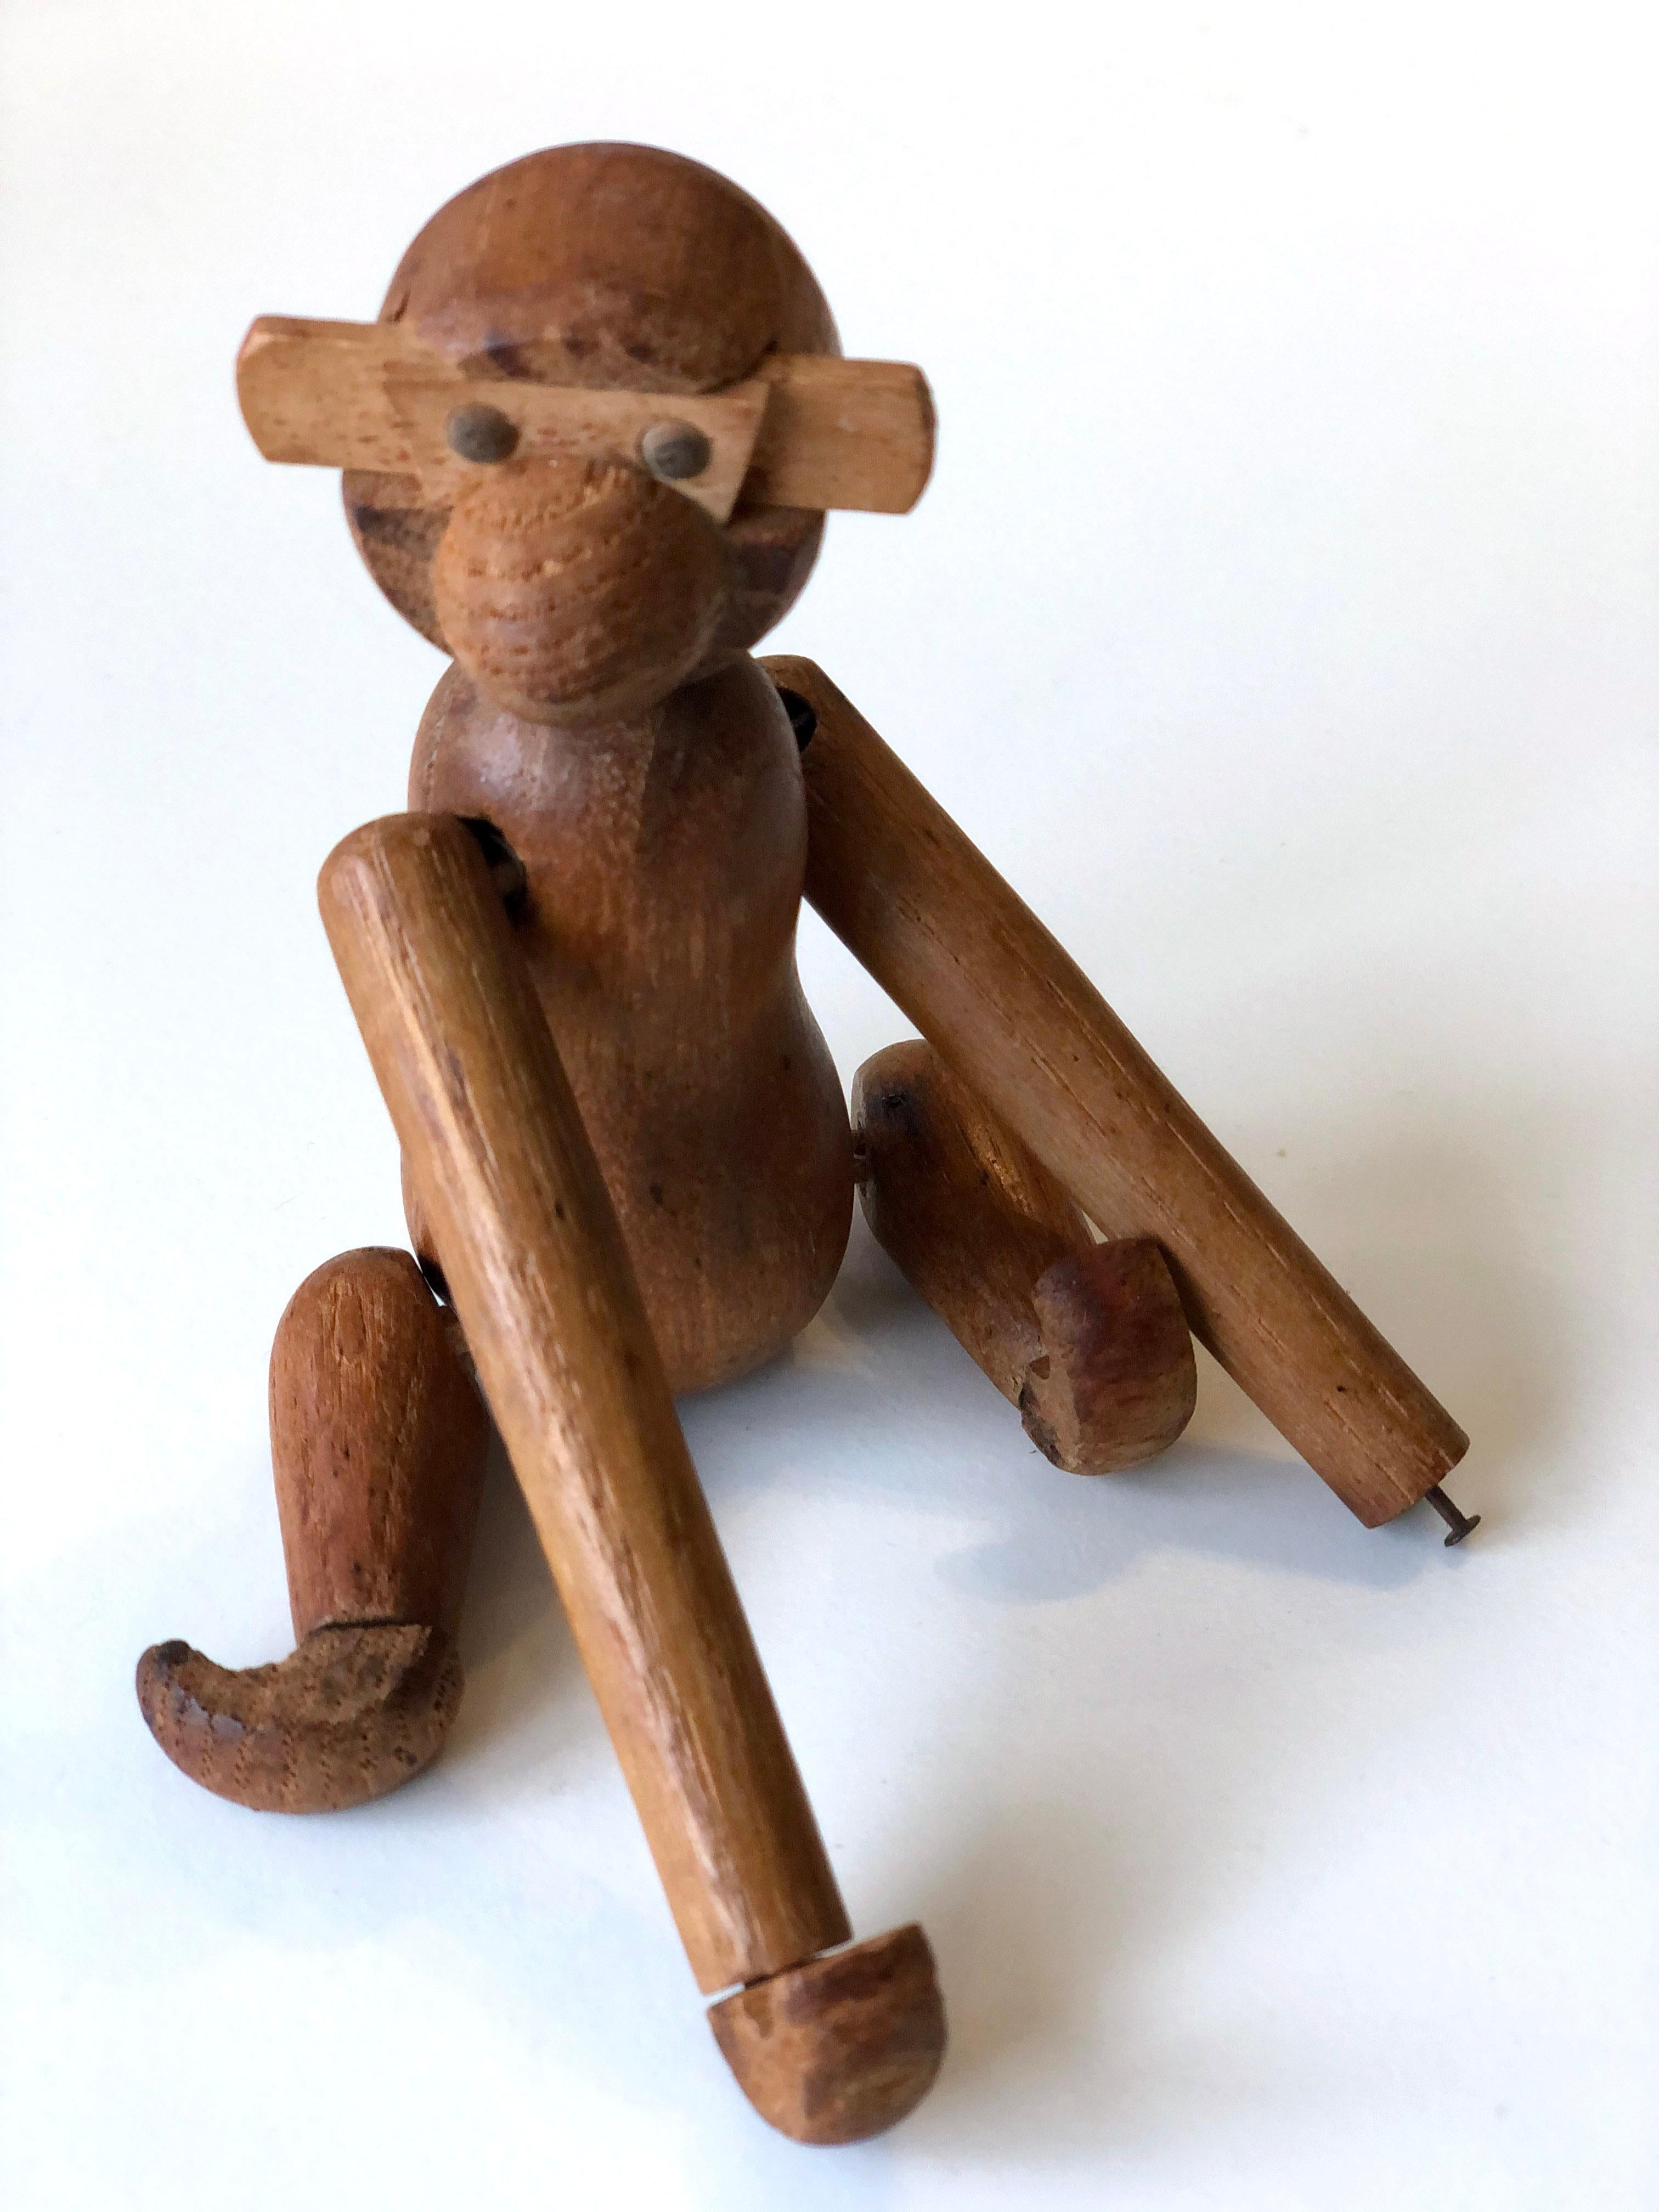 Vintage 1950's small wooden monkey - Kay Bojesen style For Sale 5